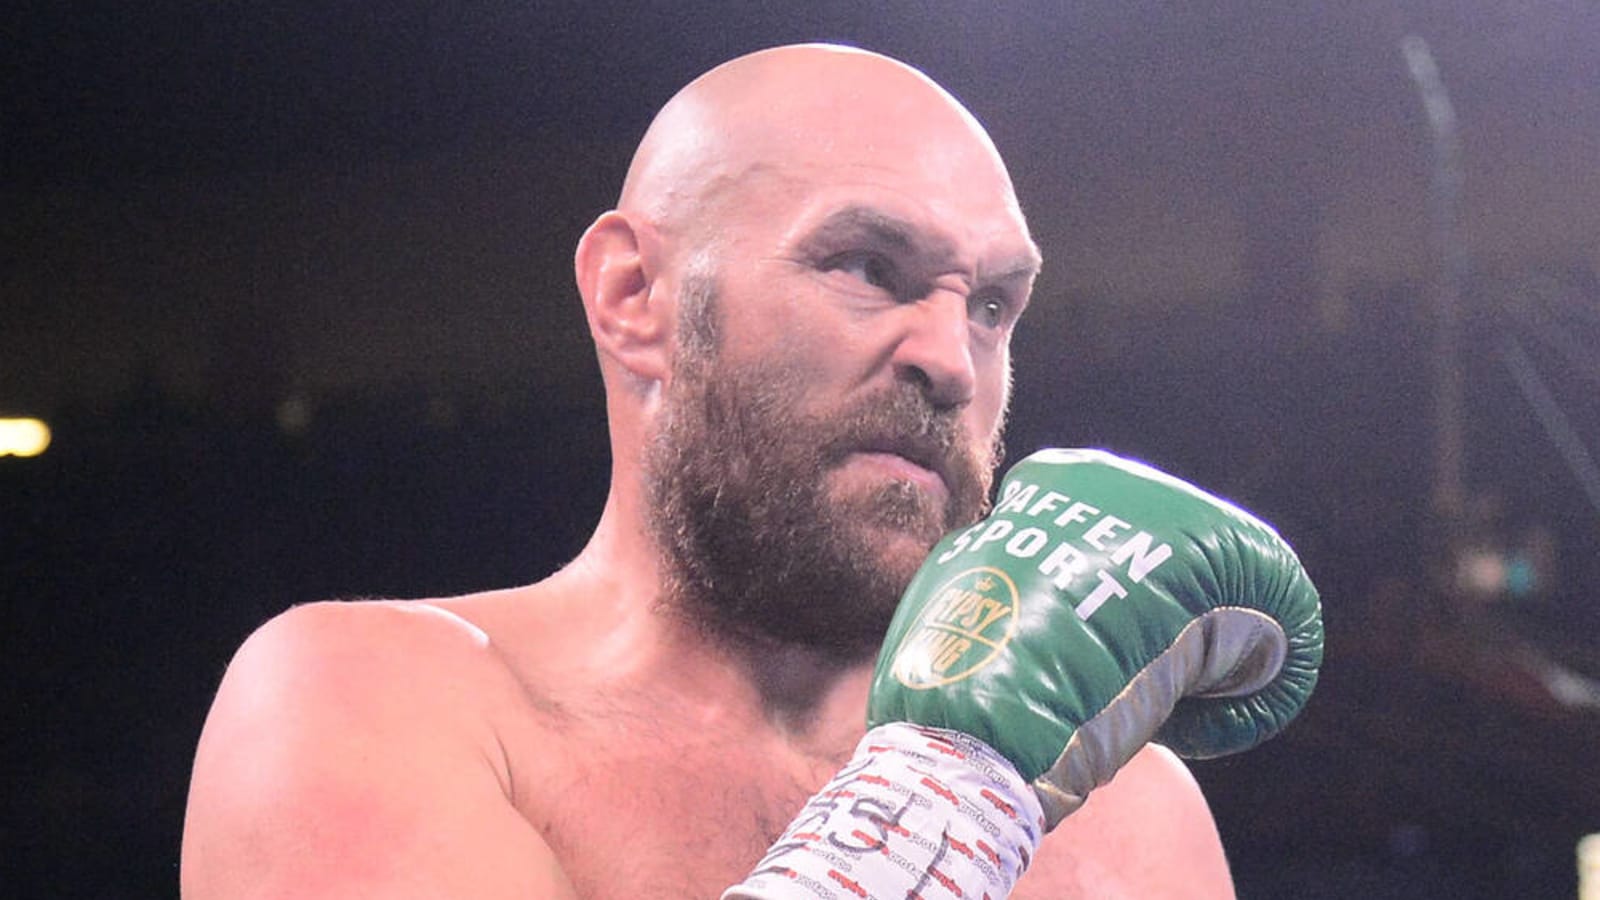 WATCH: Tyson Fury retains title with sixth-round KO of Dillian Whyte